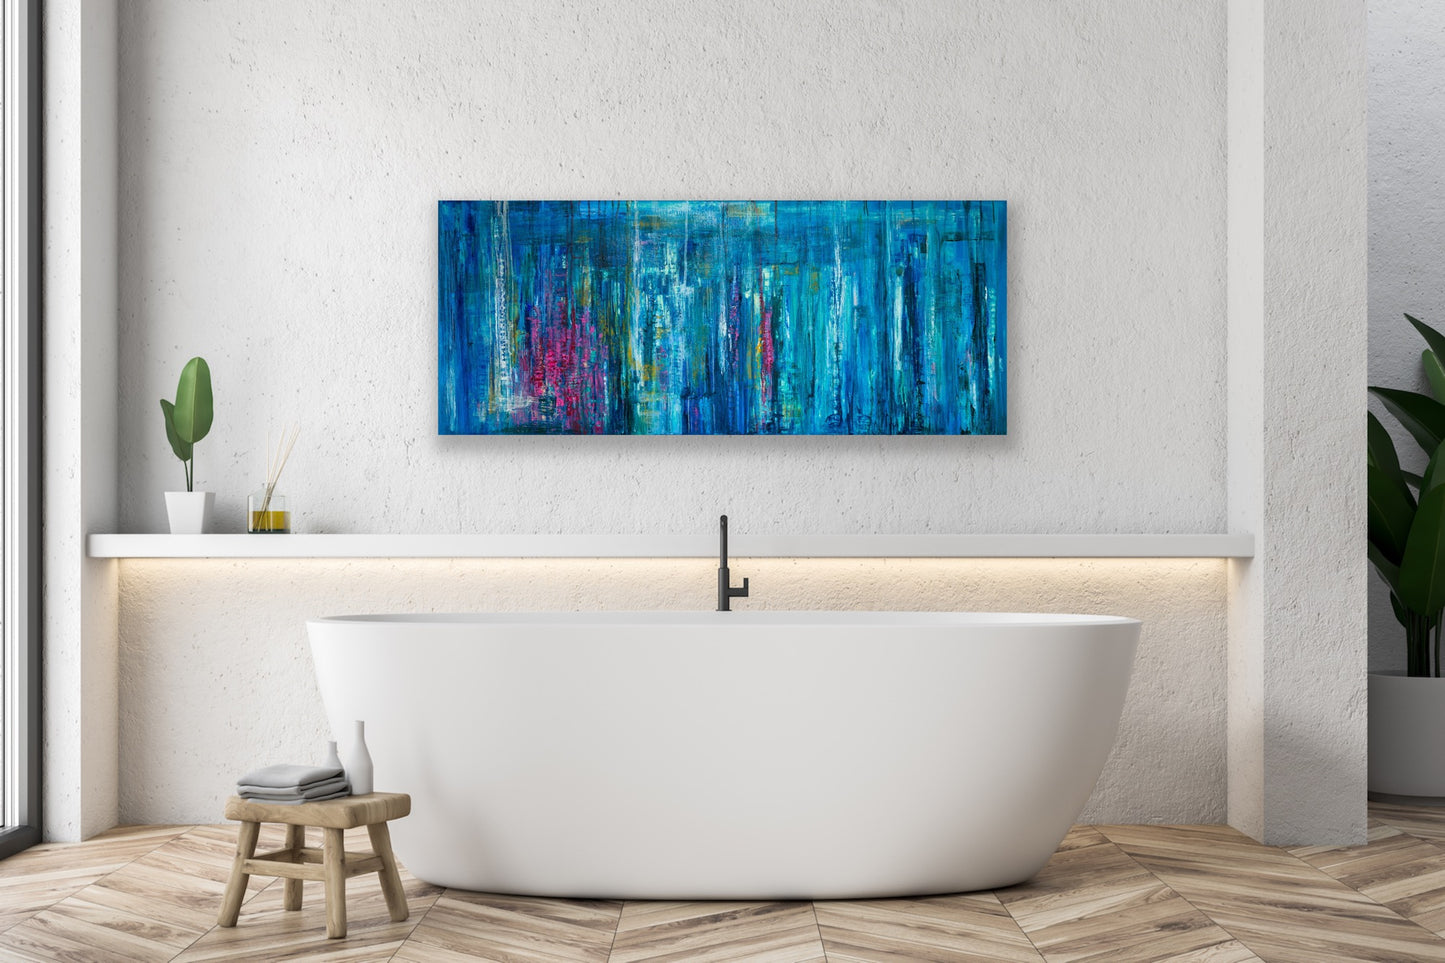 Deep Blue (2021) - Gallery Wrapped Canvas print - Luca Domiro Art Gallery